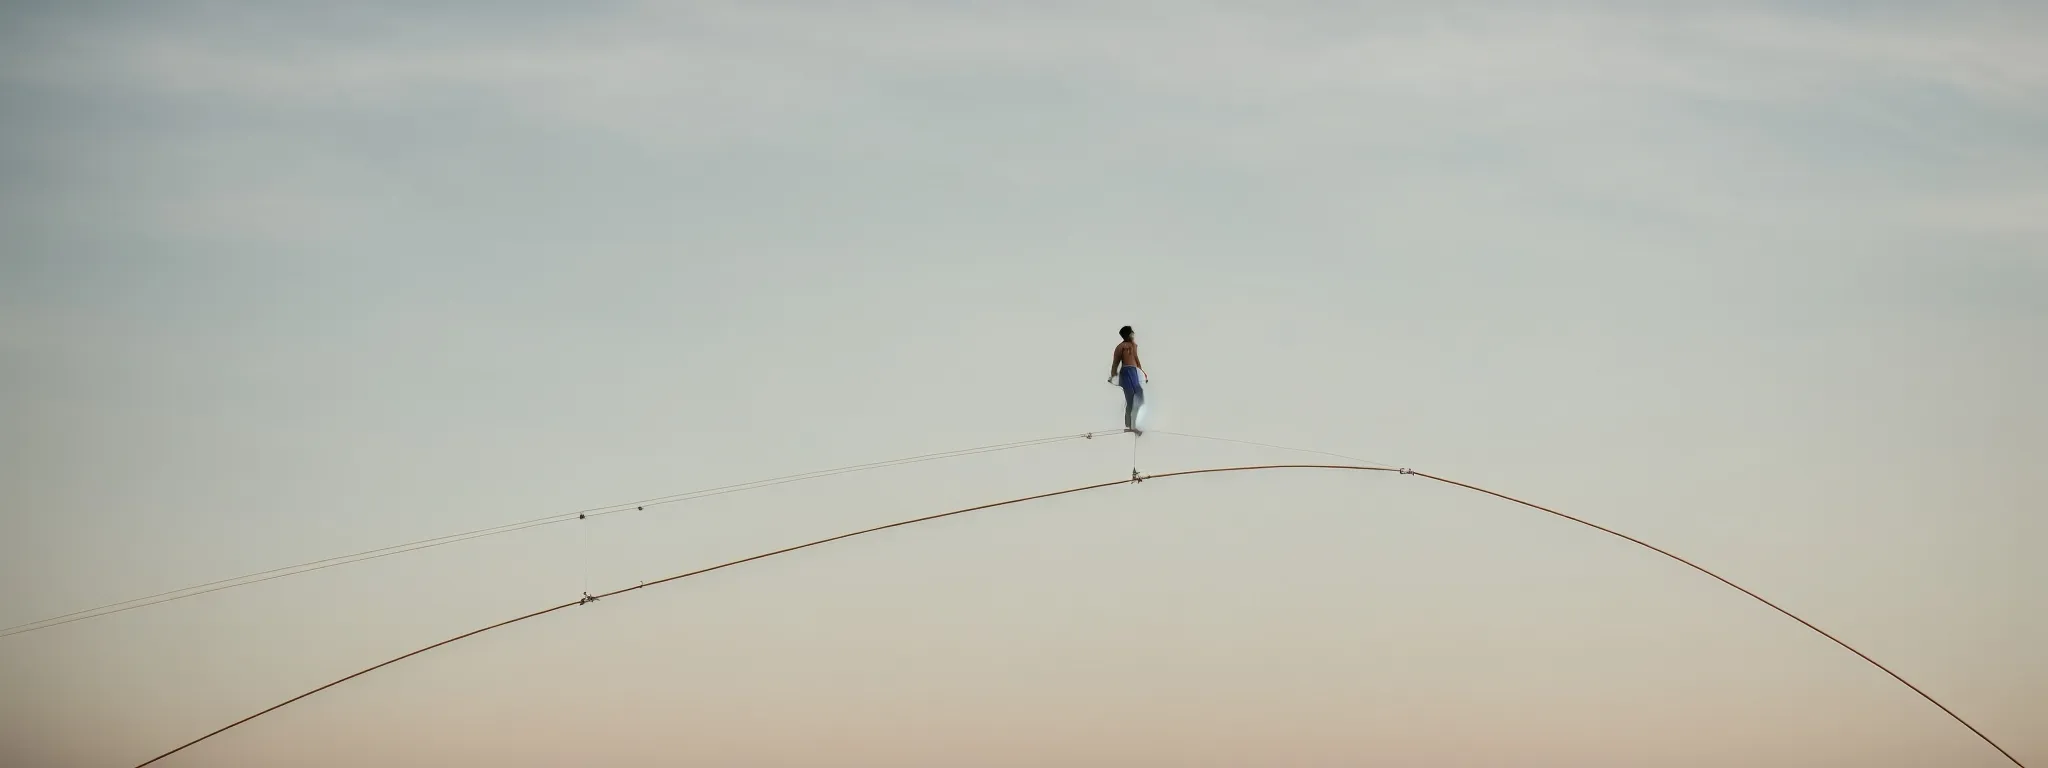 A Tightrope Walker Balances Gracefully, Scanning The Horizon As They Proceed.